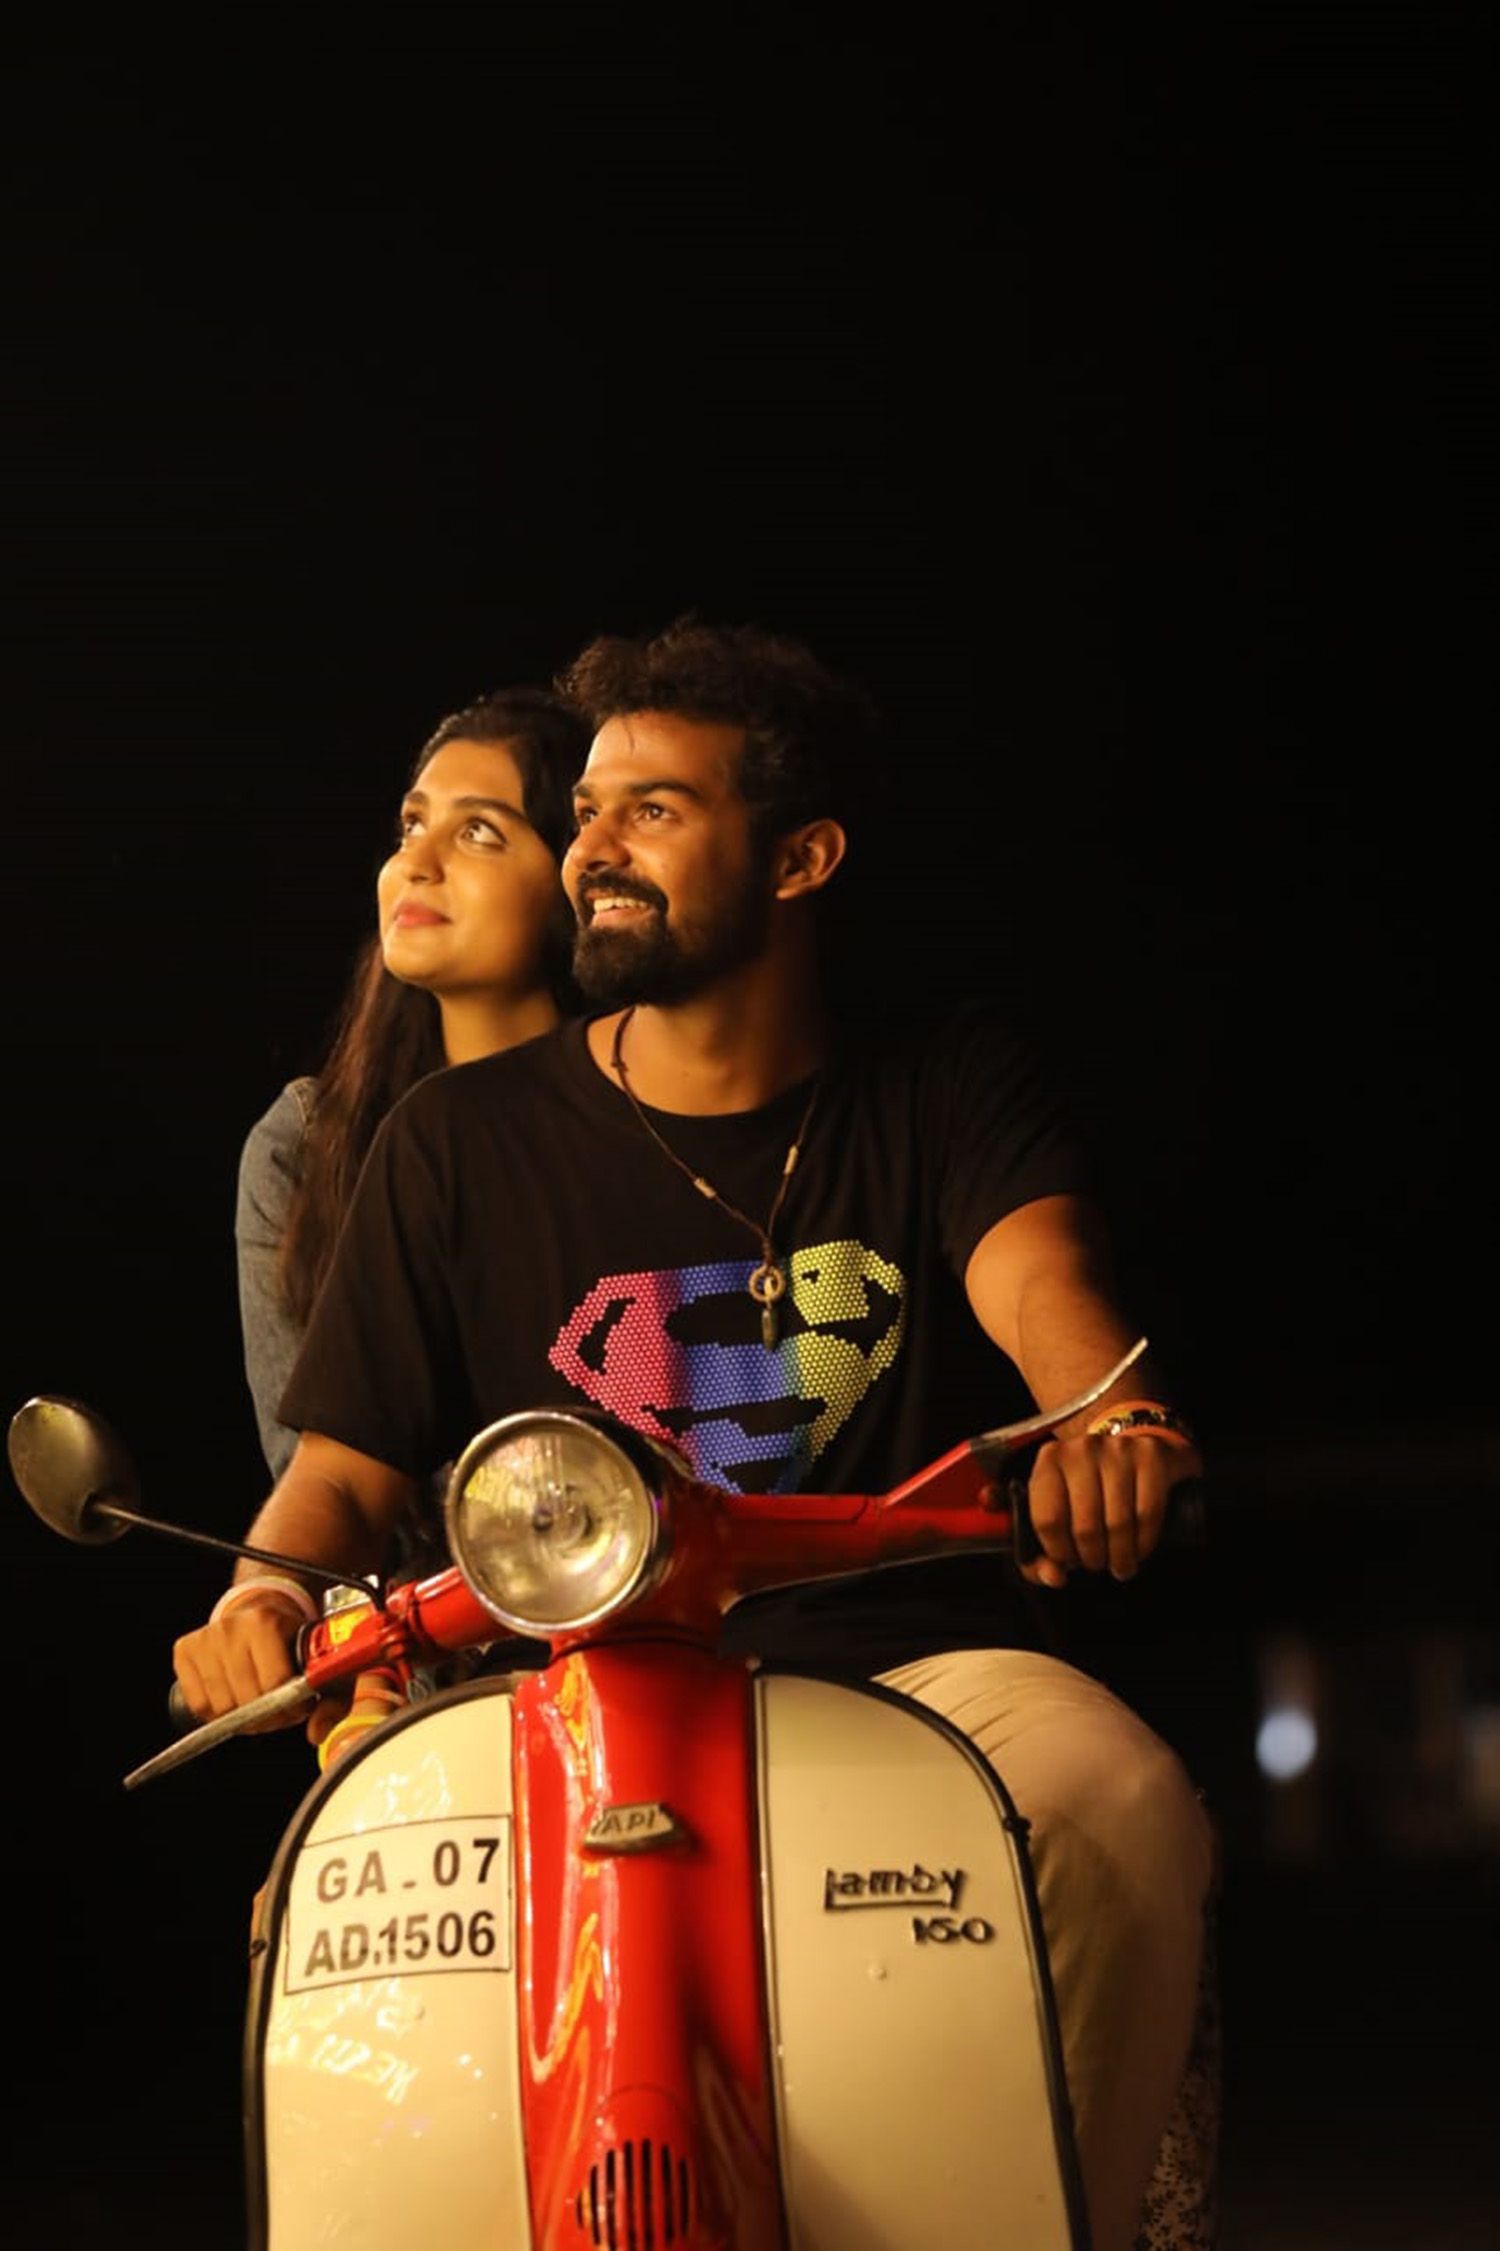 Check out these new stills of Pranav Mohanlal from Irupathiyonnam Noottandu